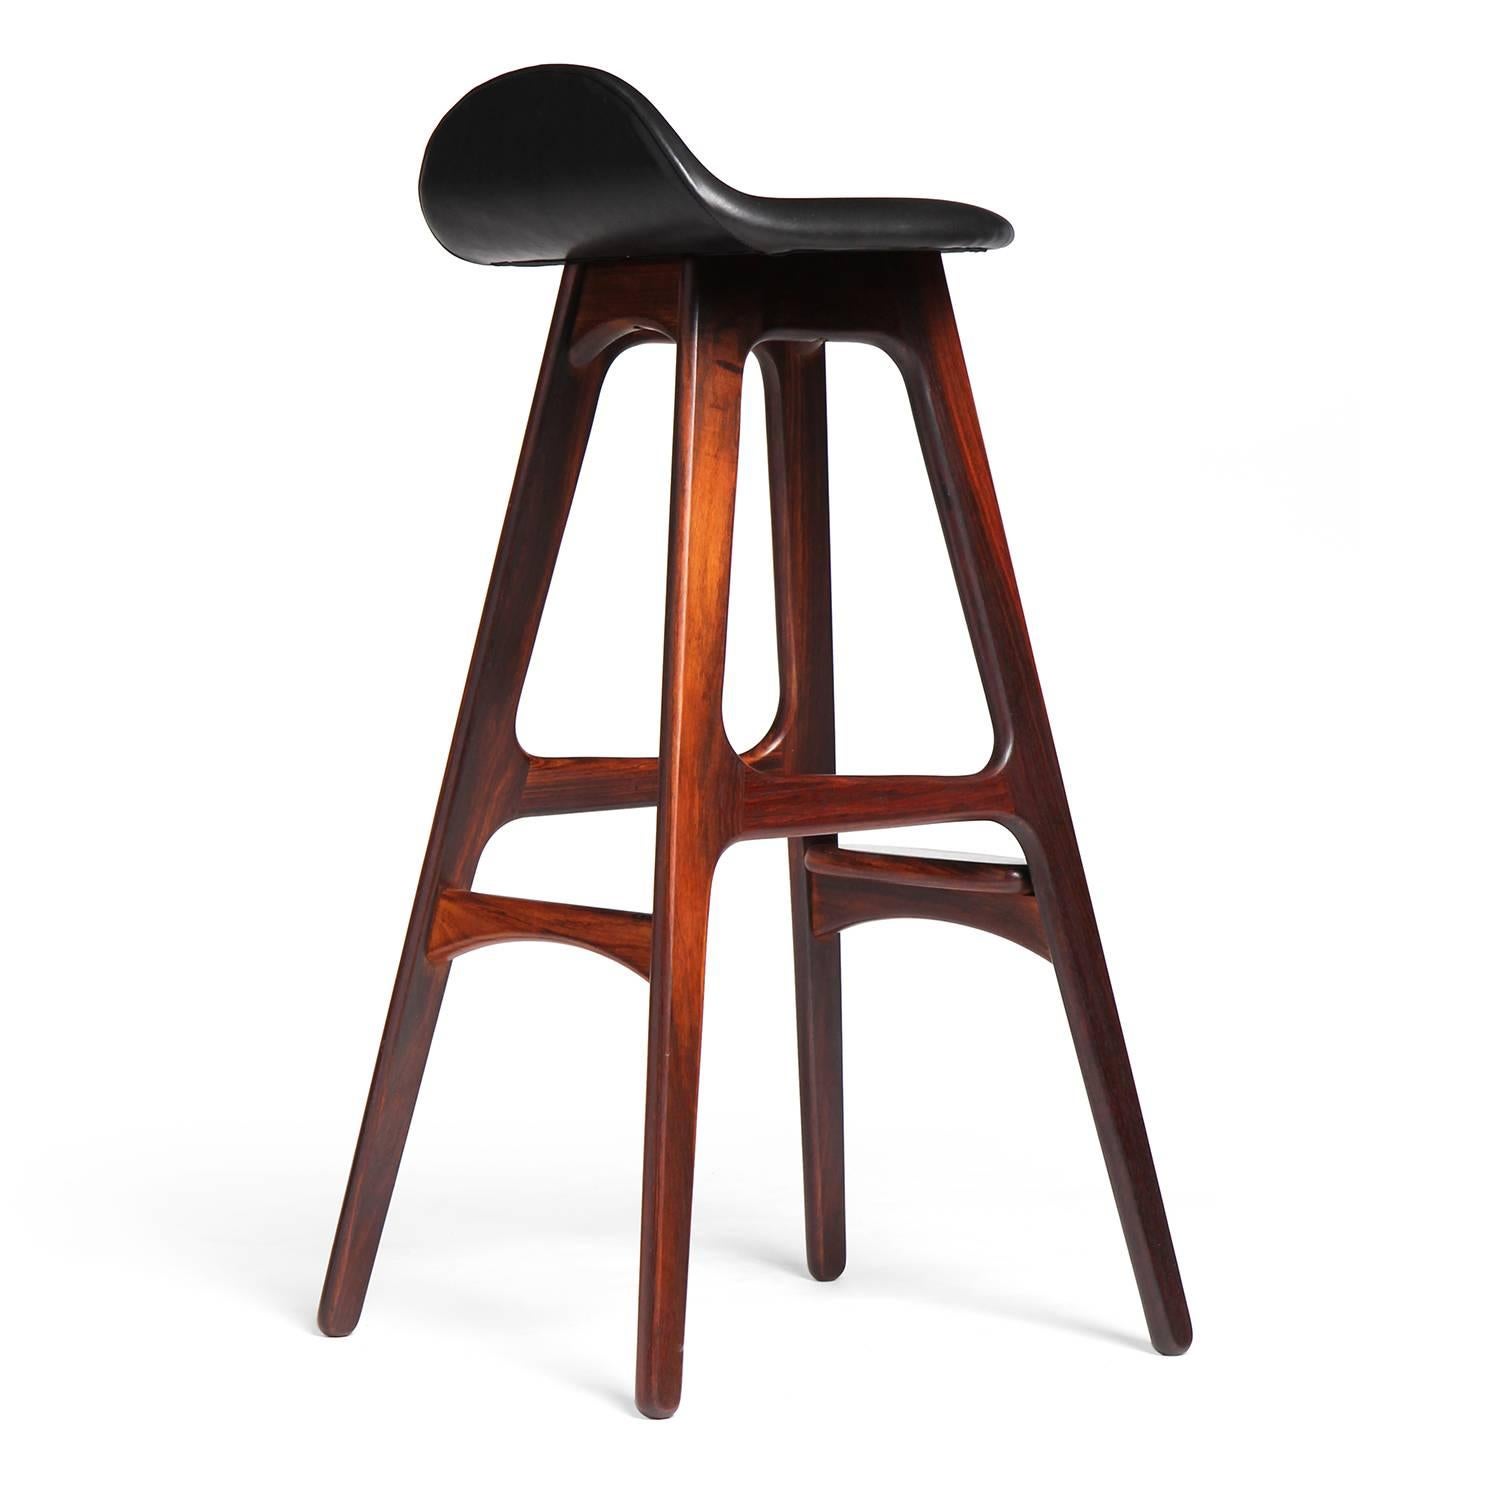 A sculptural and comfortable barstool having splayed legs, a  shaped seat with an upturned back support and a rounded projecting foot rest.